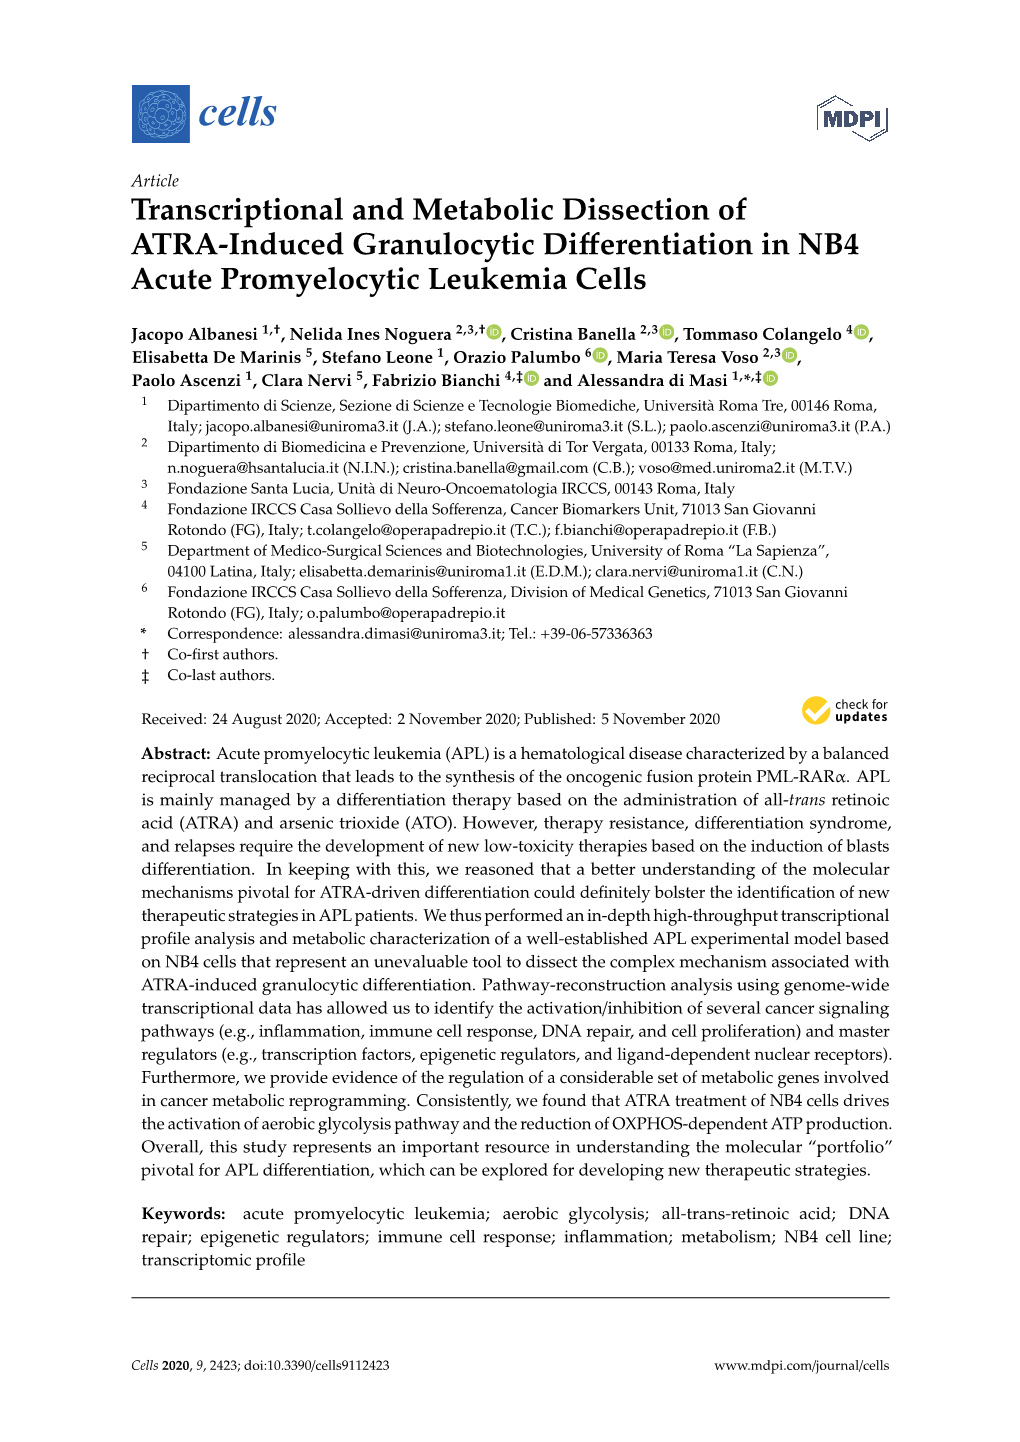 Transcriptional and Metabolic Dissection of ATRA-Induced Granulocytic Diﬀerentiation in NB4 Acute Promyelocytic Leukemia Cells